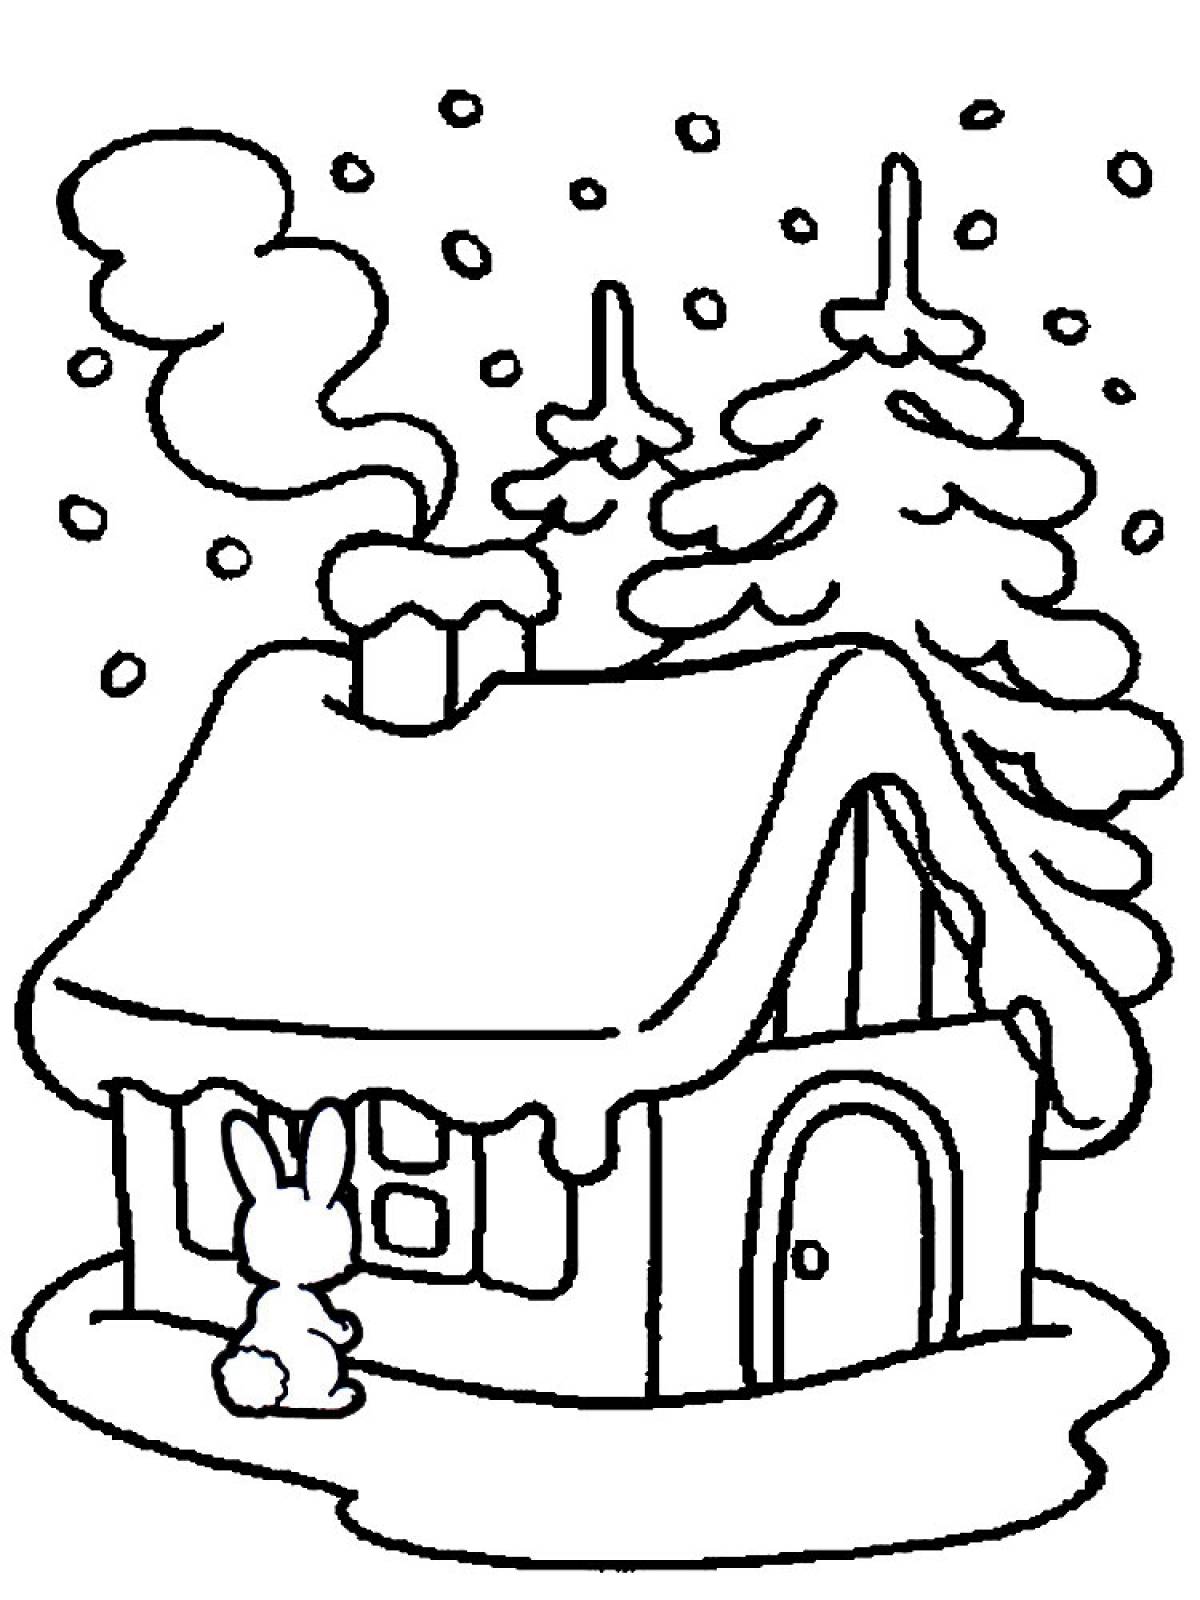 Winter coloring page for children 6 years old